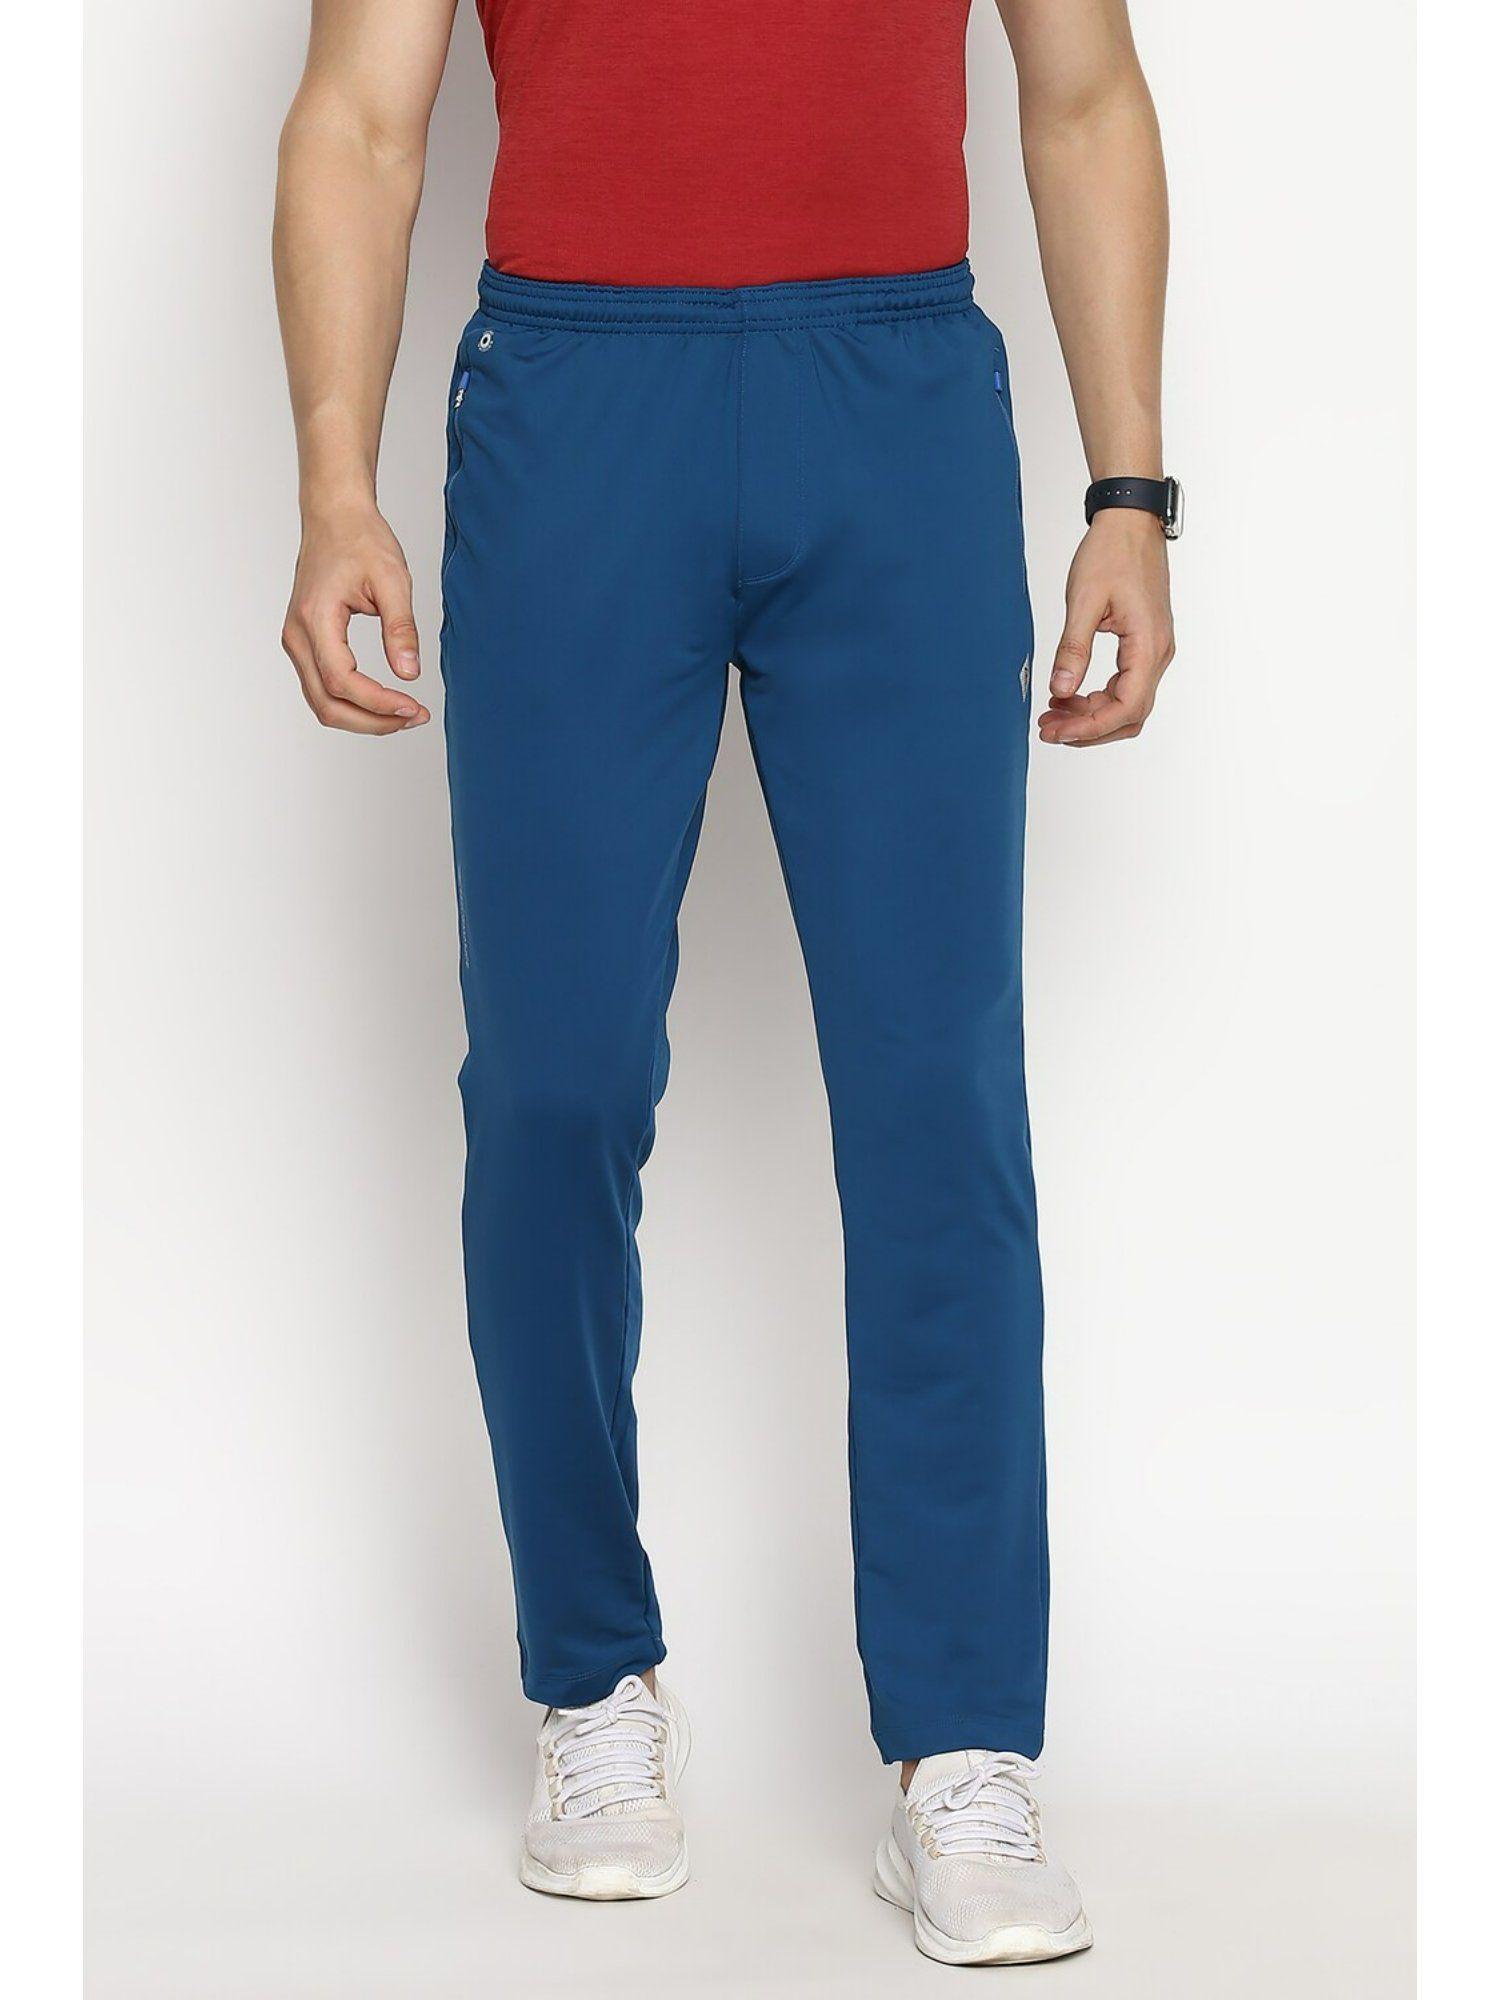 performance men swift dry & 4 way stretch trackpants - coral depth